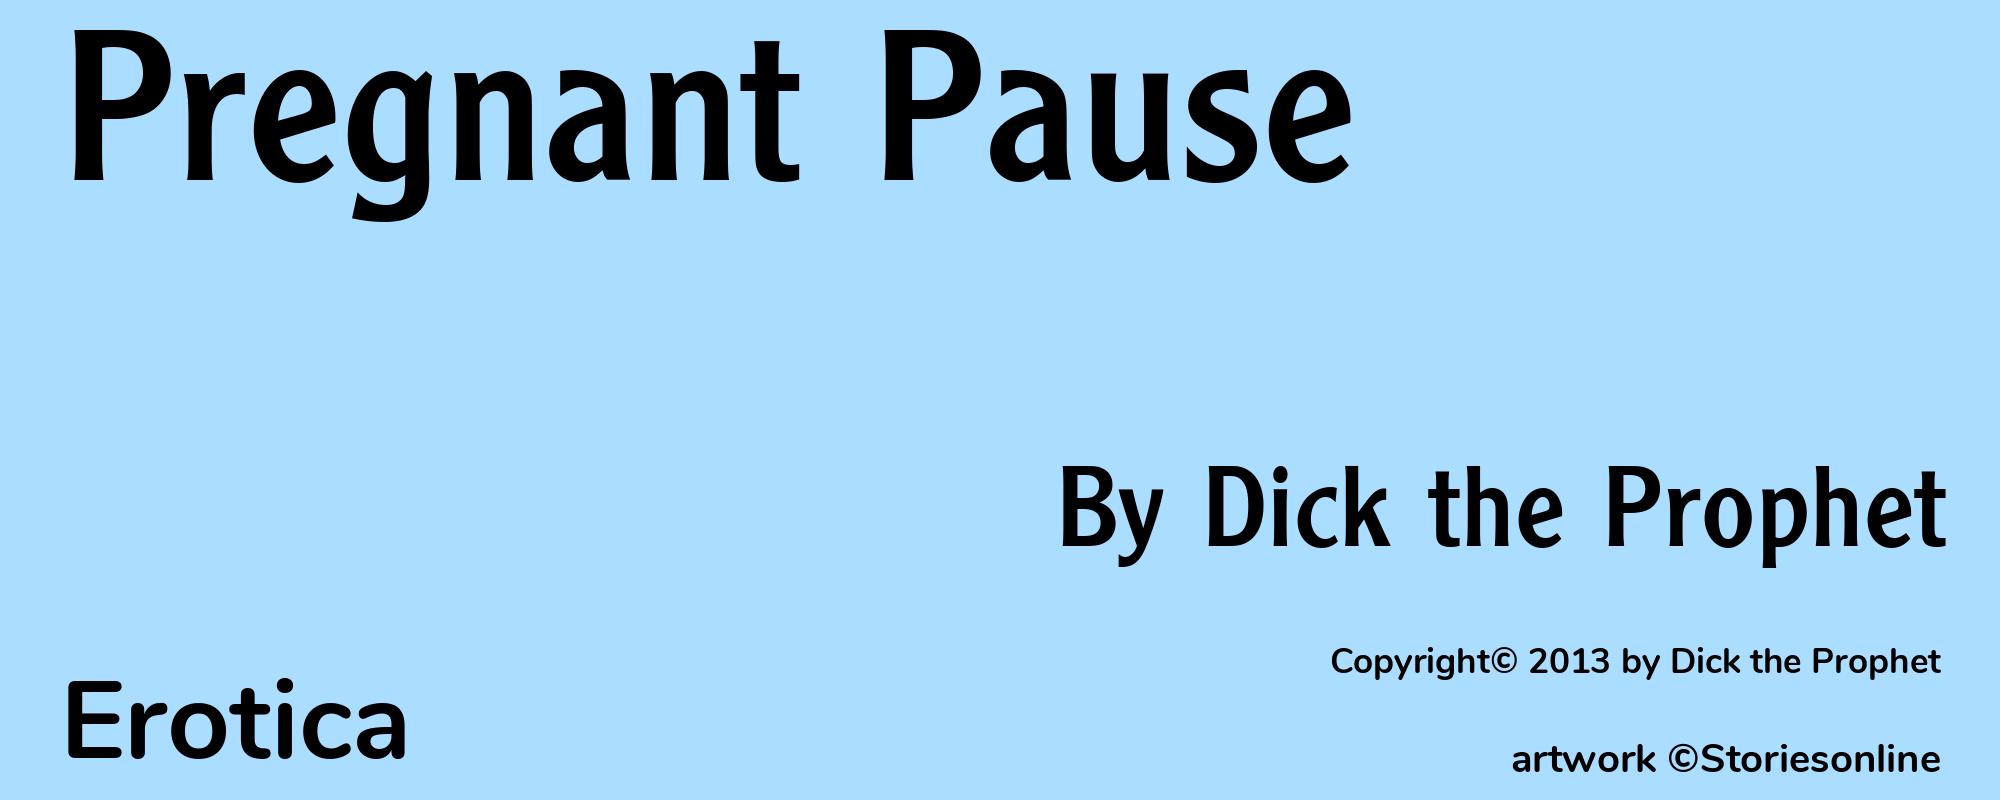 Pregnant Pause - Cover